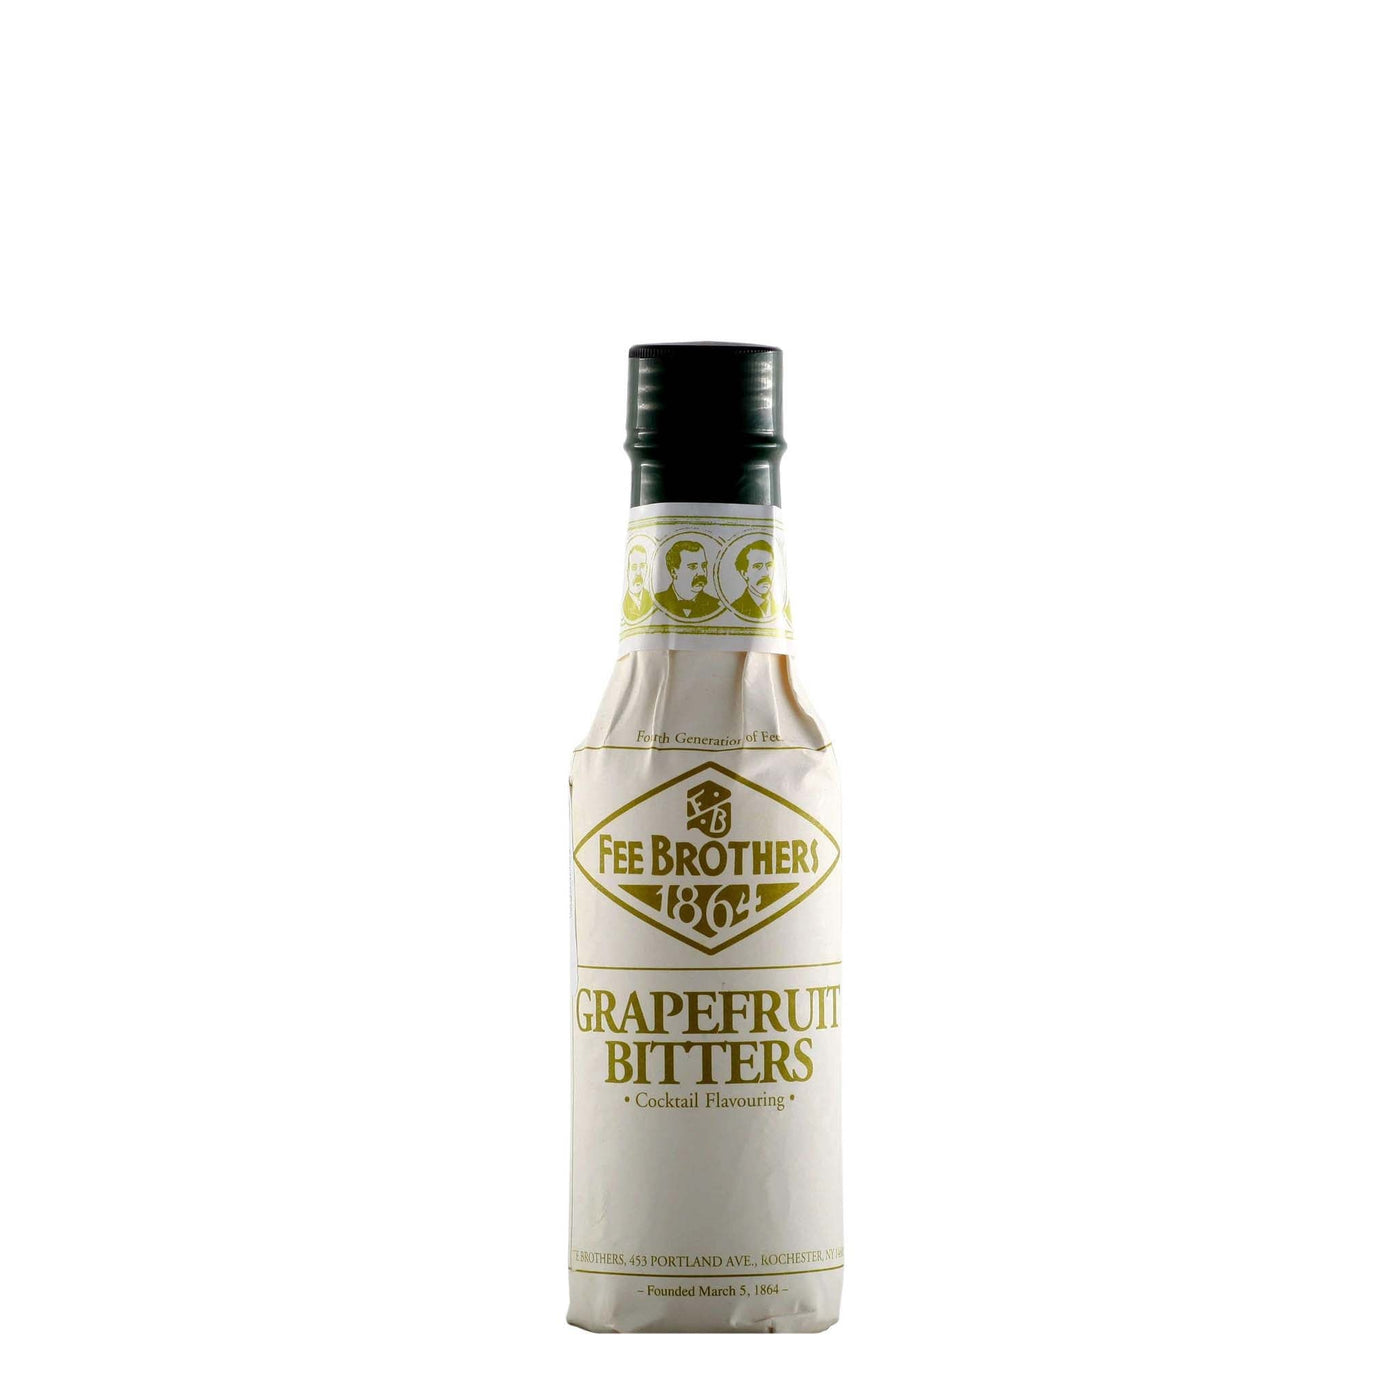 Fee Brothers Grapefruit Bitters - Spiritly